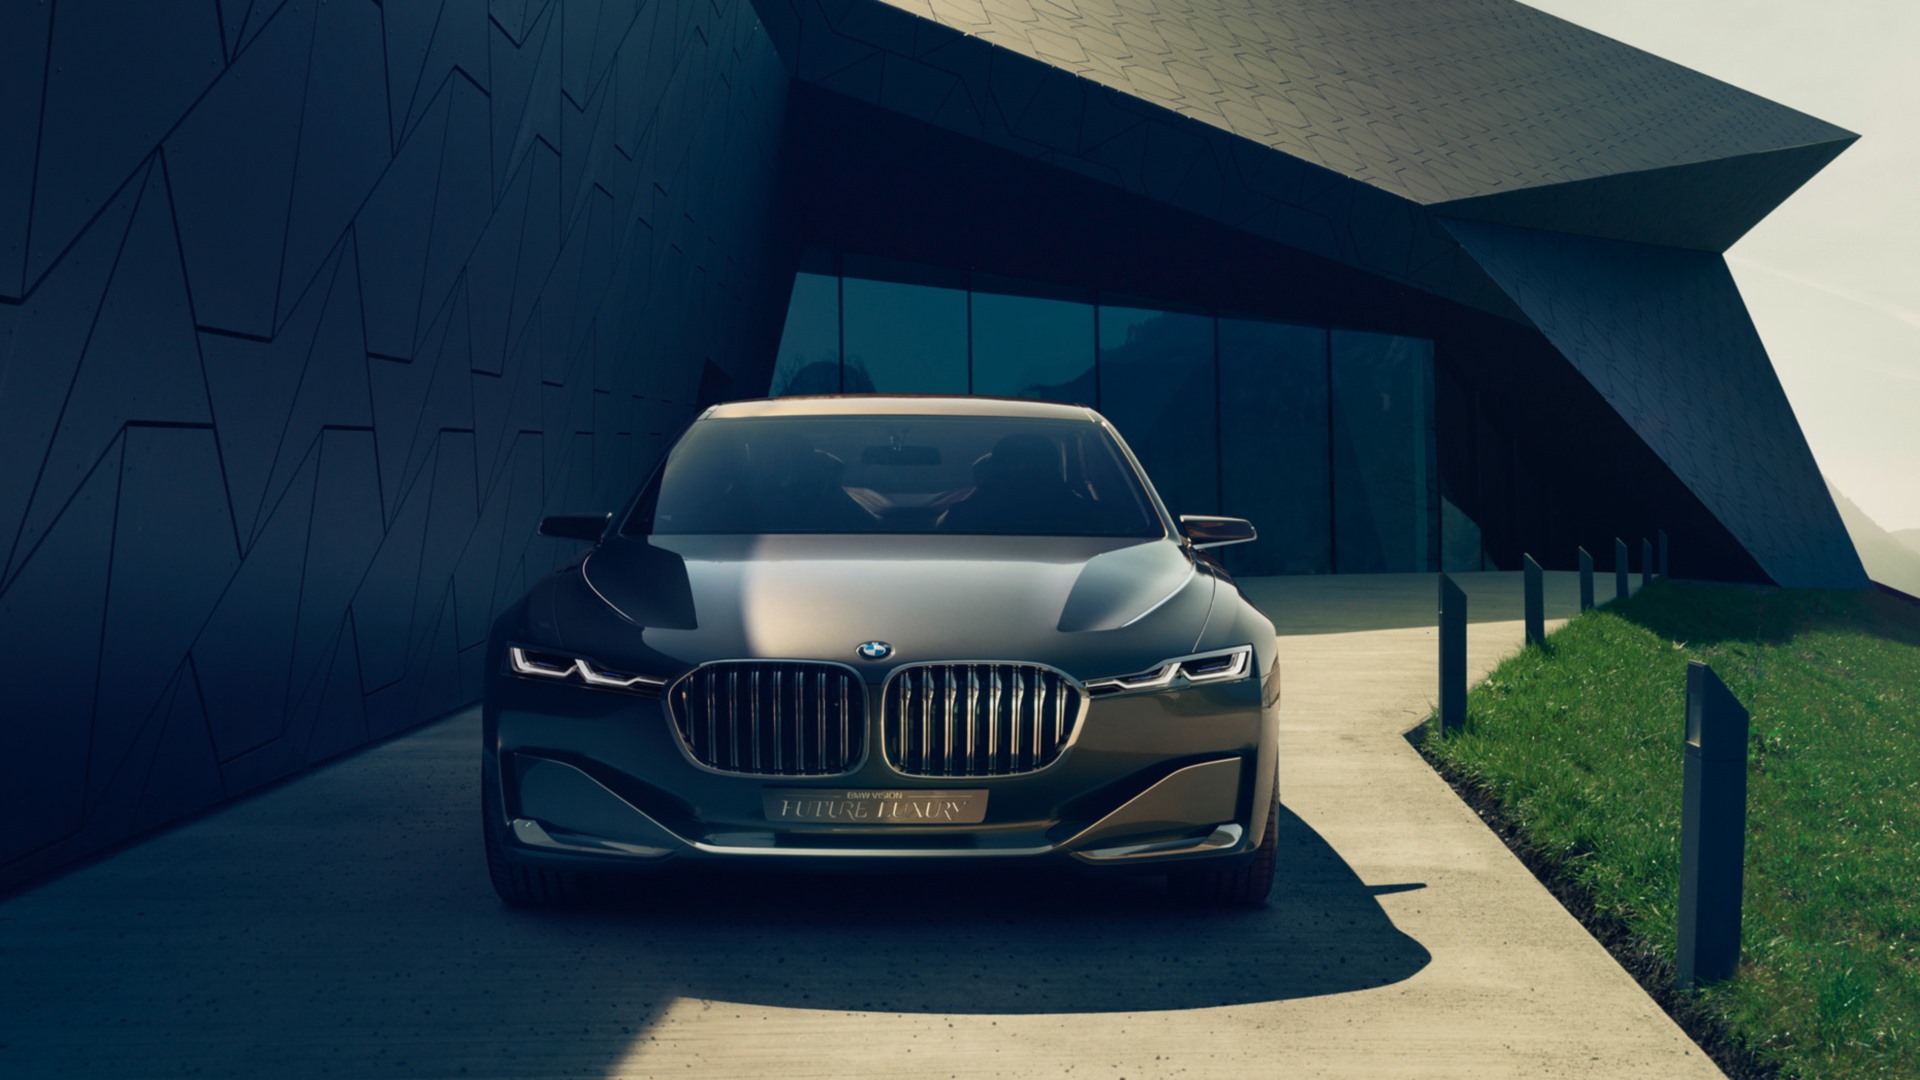 Vehicles 2014 Bmw Vision Future Luxury Concept HD Wallpaper | Background Image